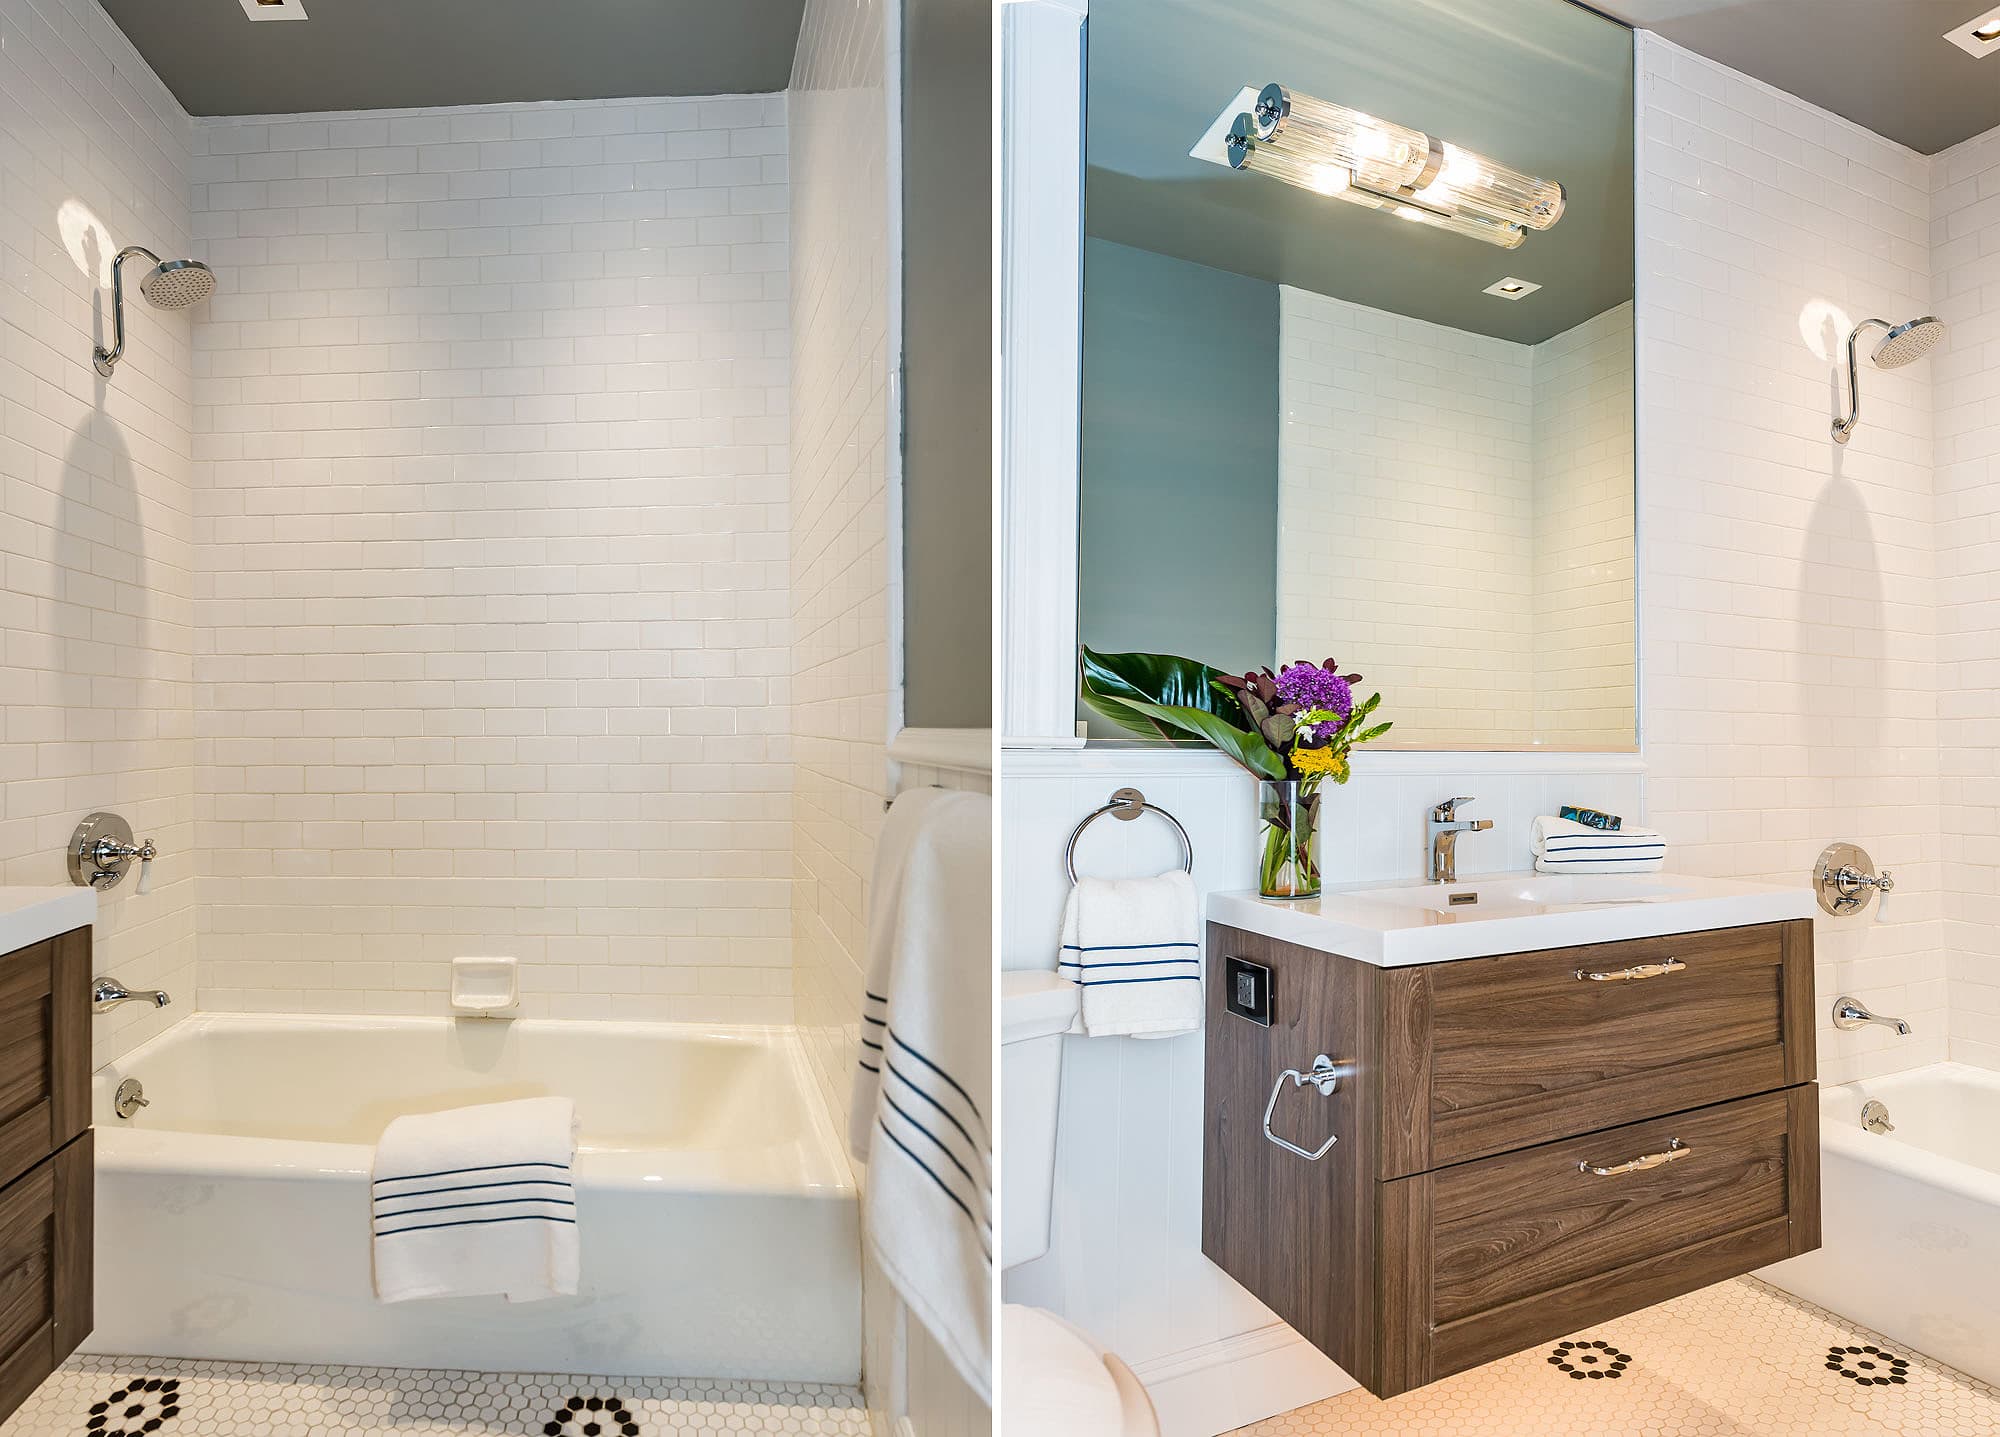 714 Page's bathroom has been updated and features a shower over tub, traditional hex tile along with a new floating vanity and LED recessed lighting.